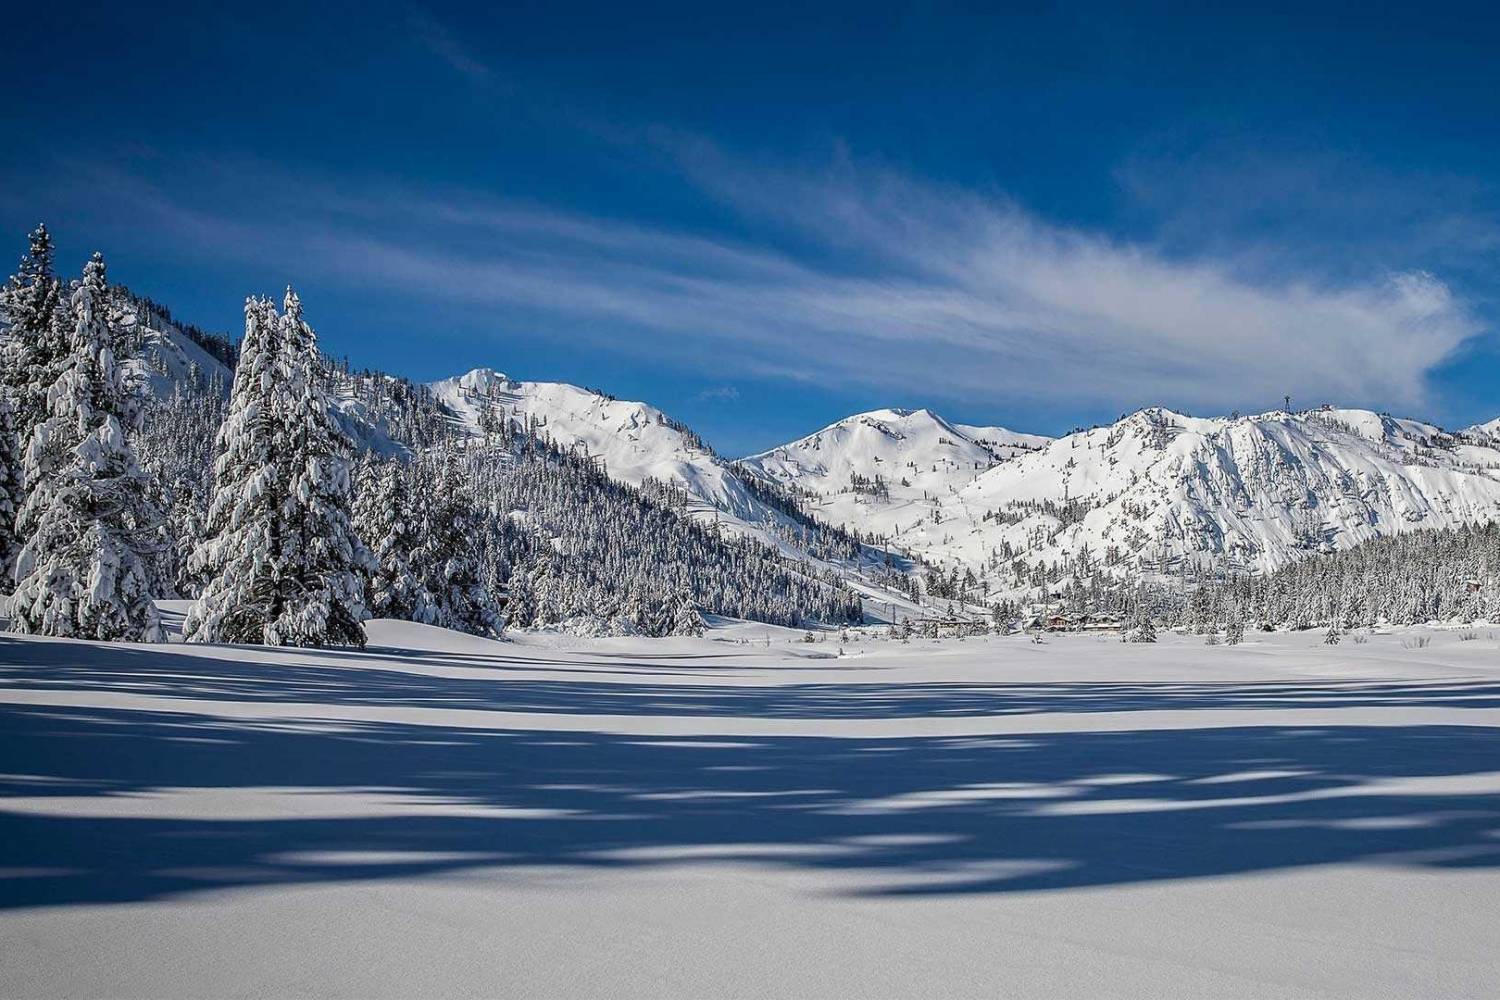 Beautiful landscape of Squaw Valley - Take a Chef